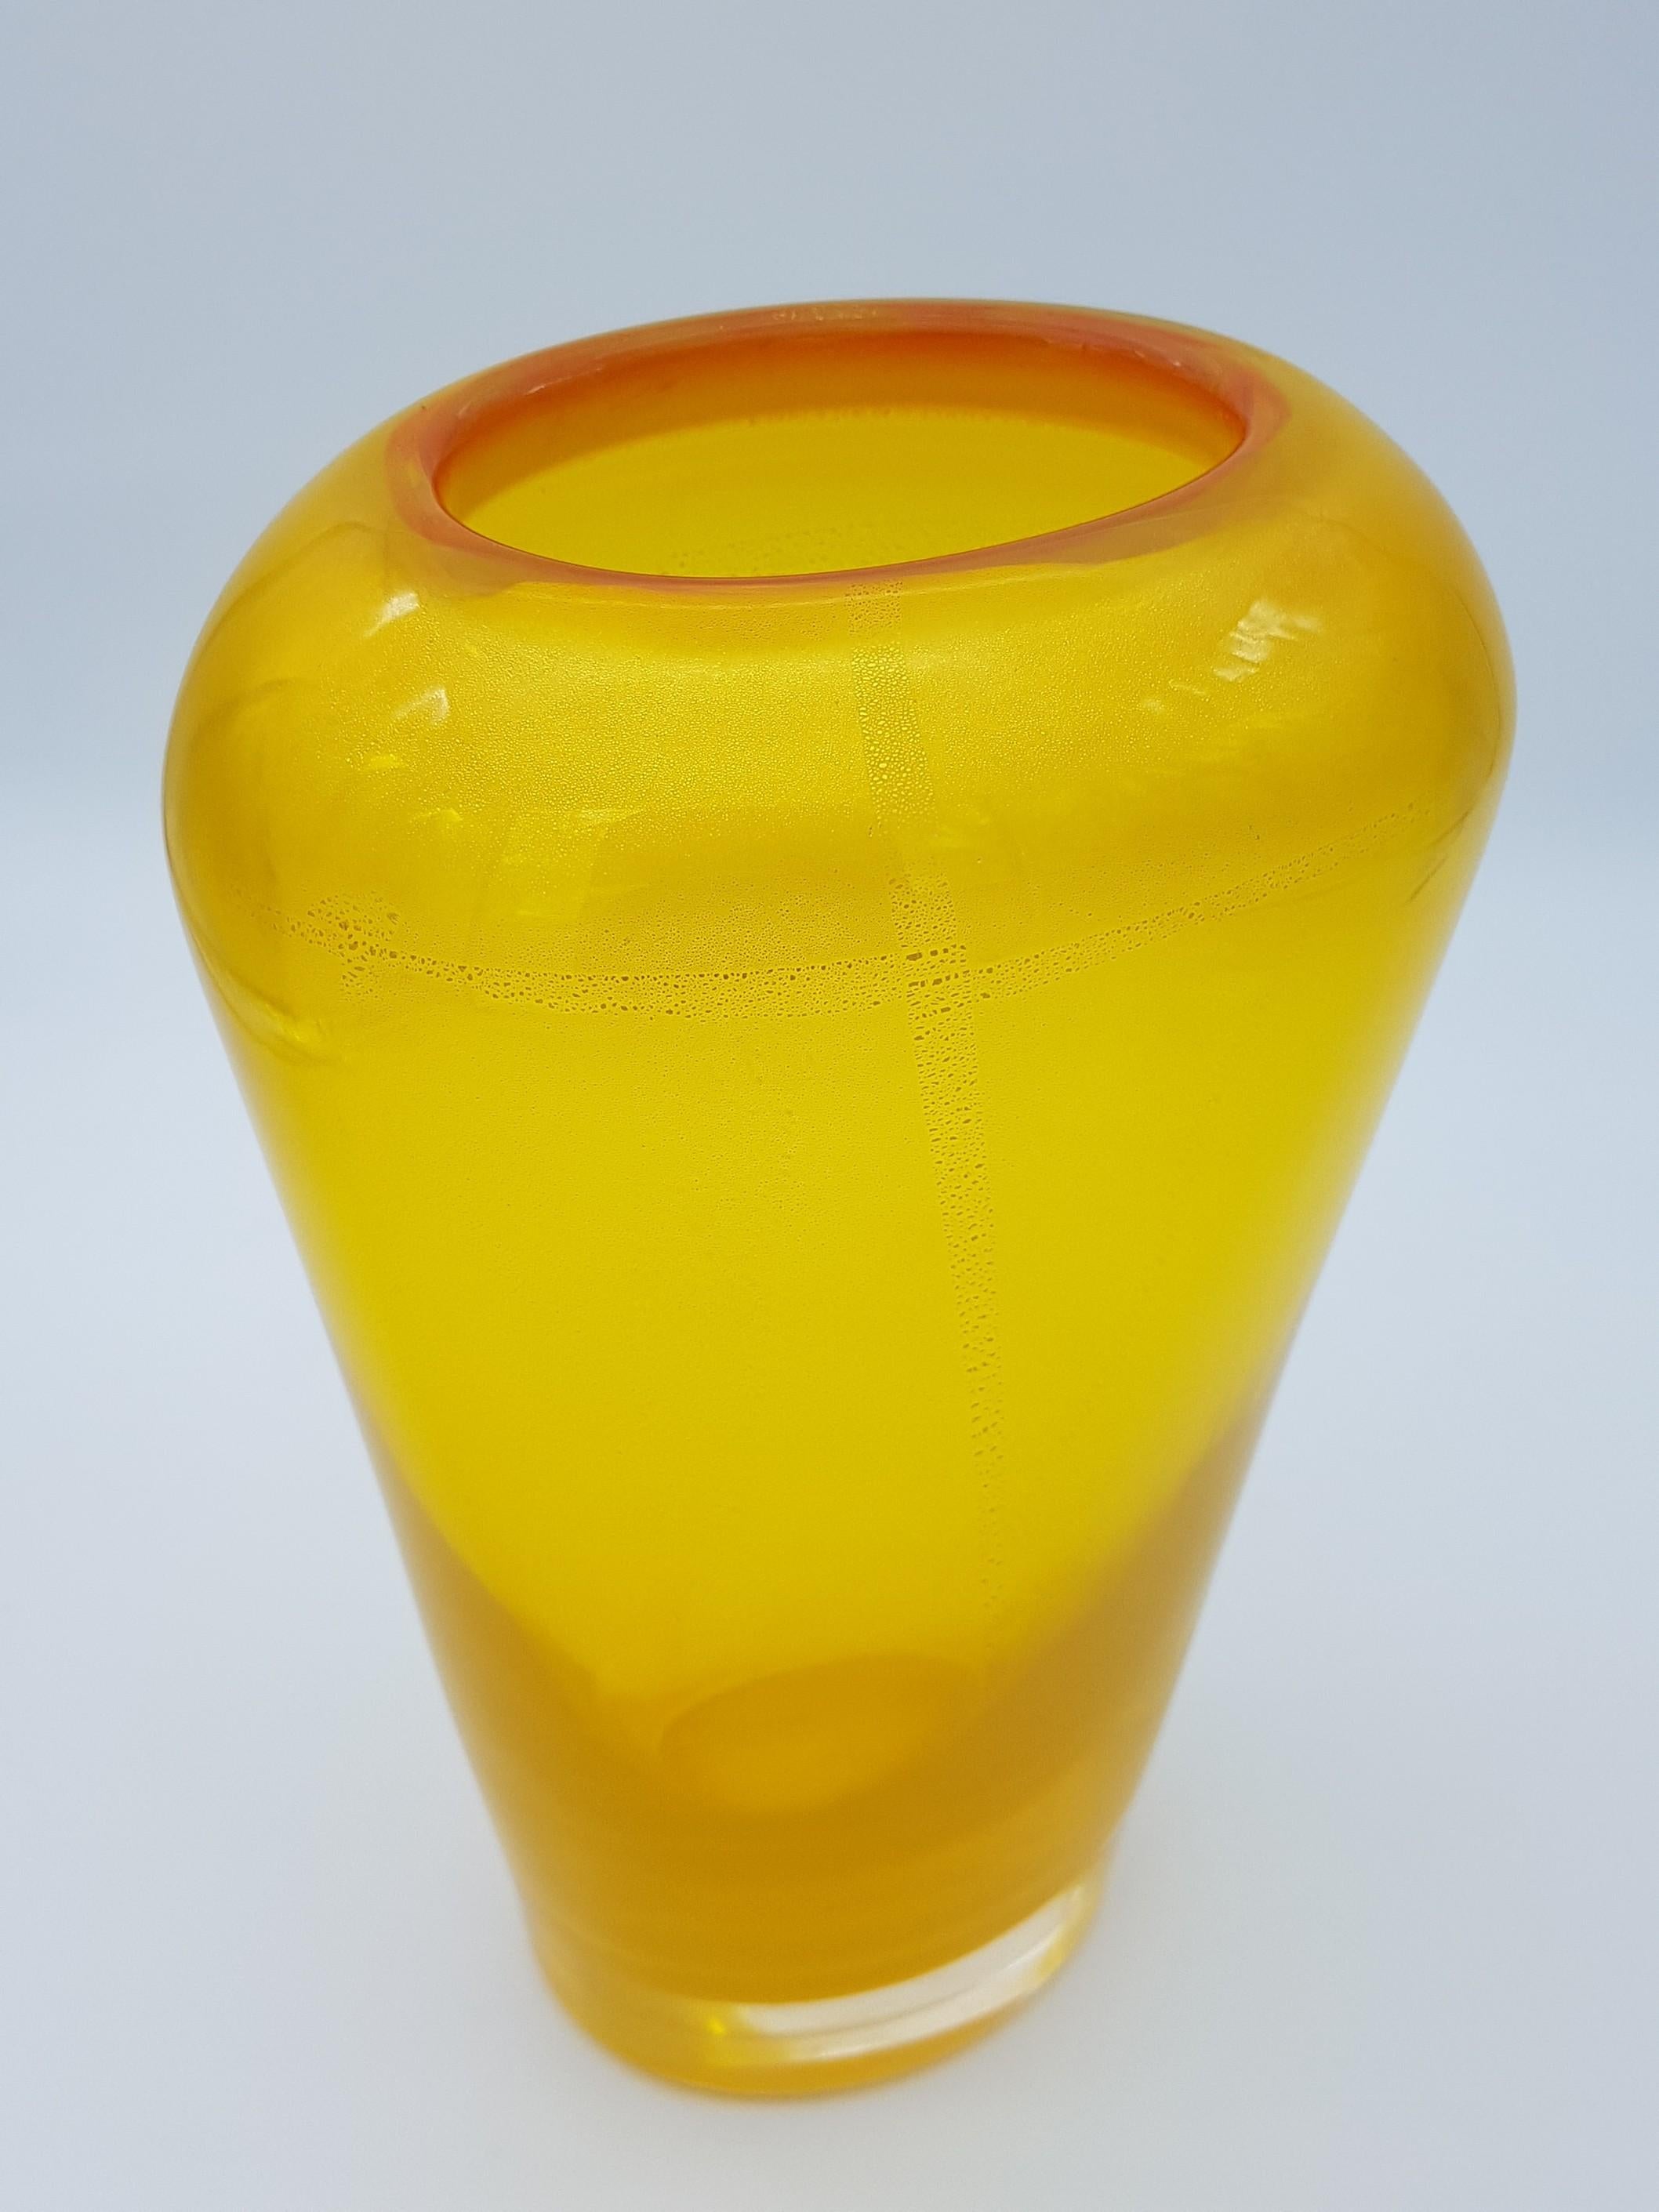 Modern Murano Glass Vase Gold Yellow Color by Cenedese, Late 1990s For Sale 3